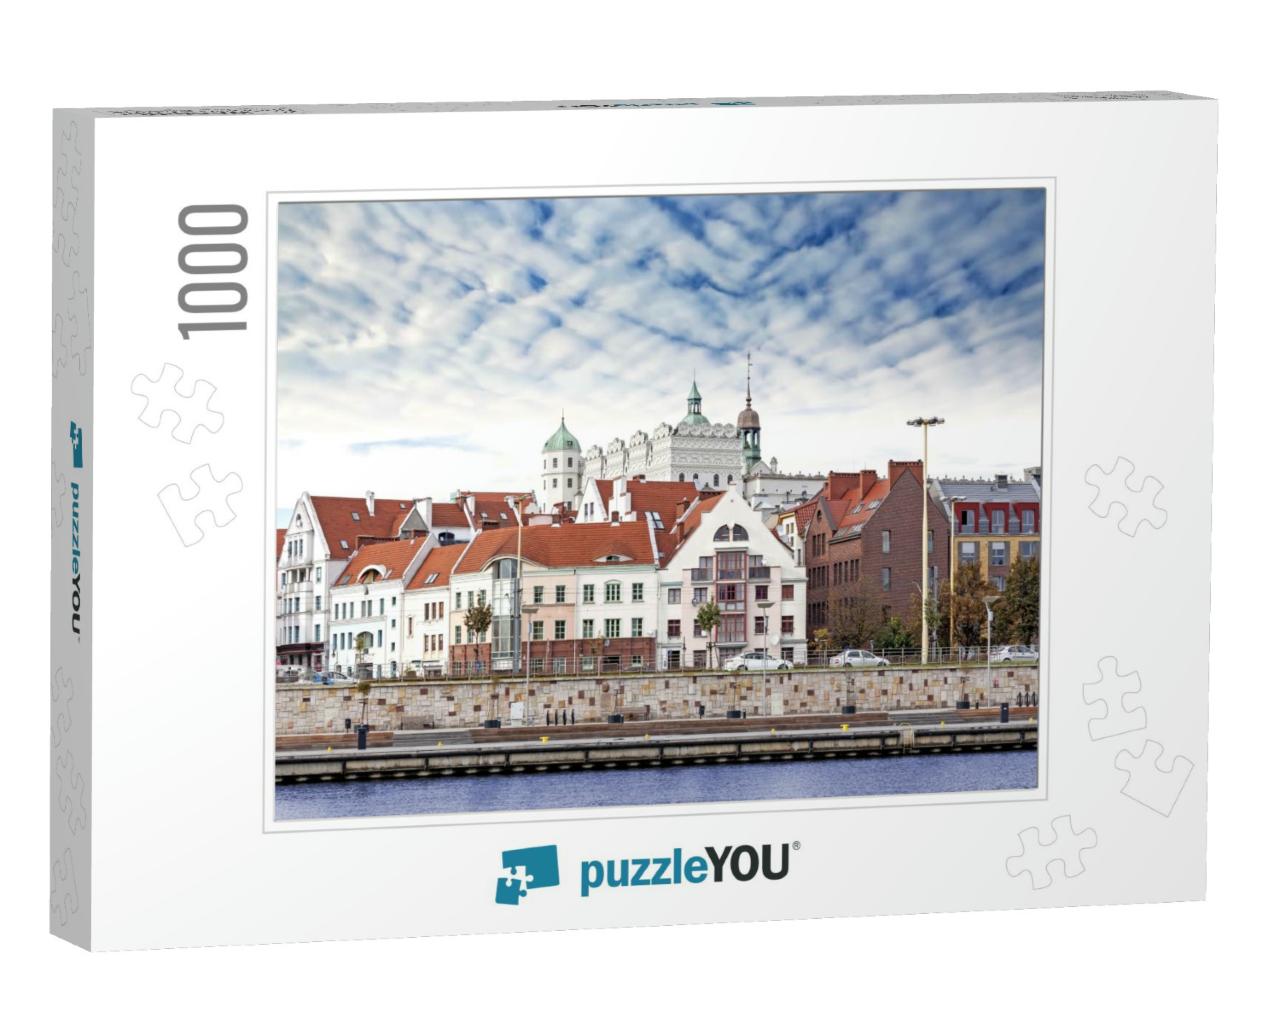 Szczecin Stettin City Old Town, Riverside View, Poland... Jigsaw Puzzle with 1000 pieces